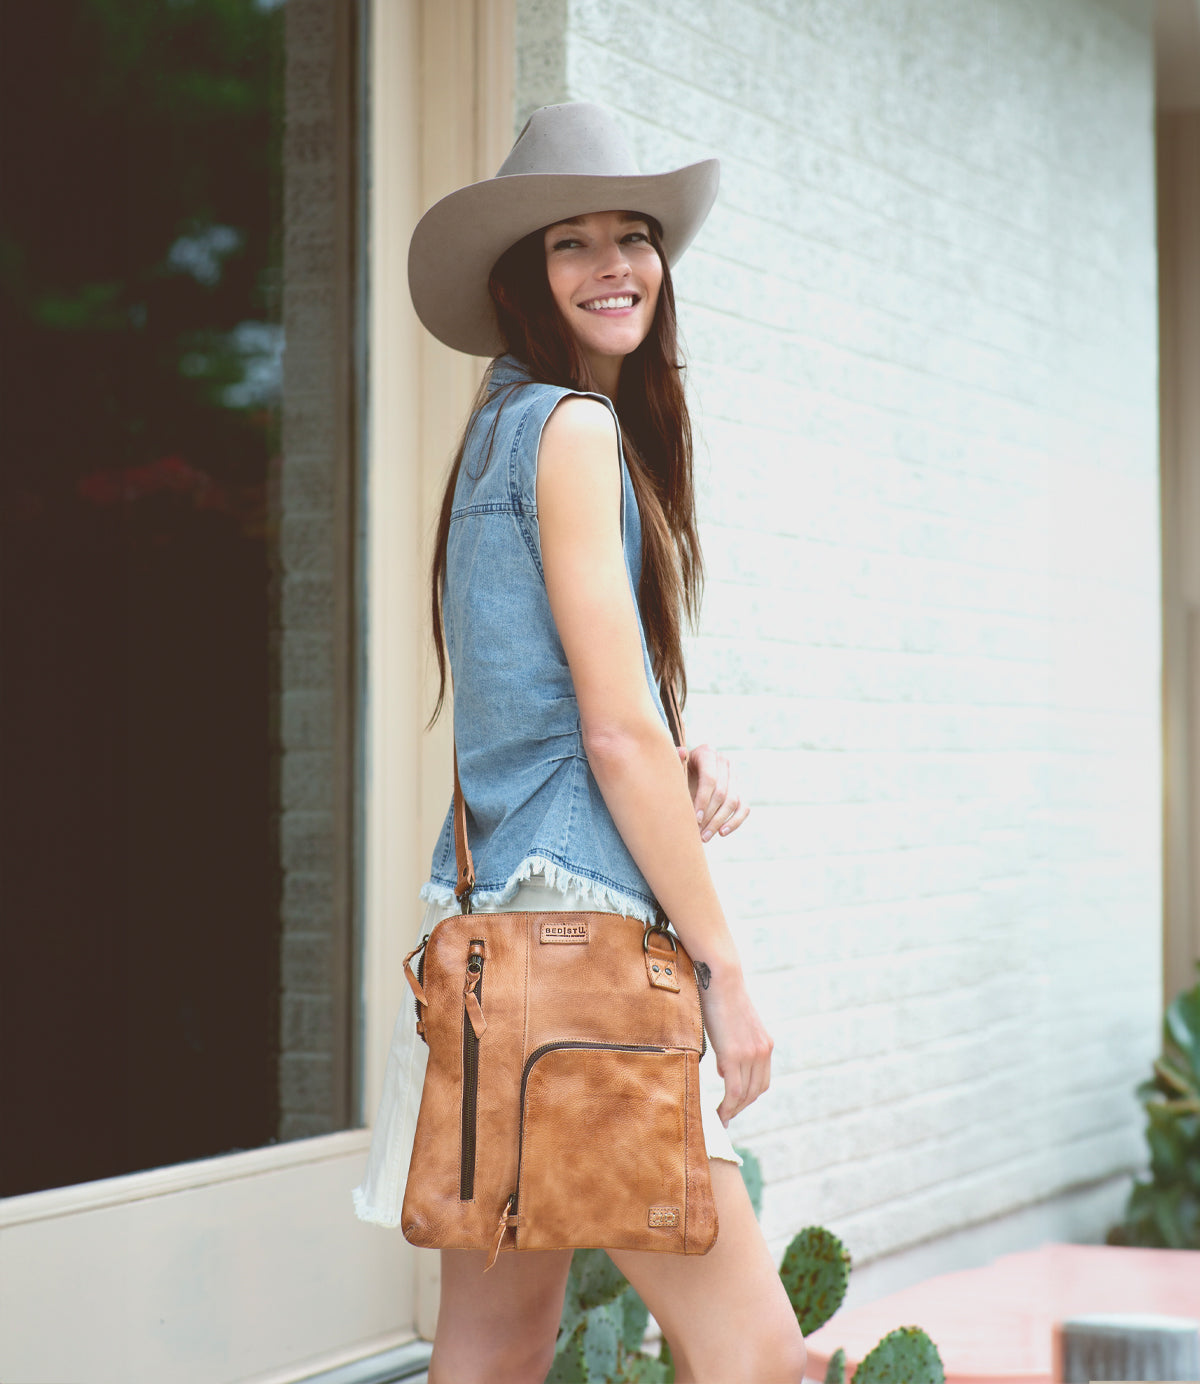 A woman wearing a cowboy hat and shorts is holding a Bed Stu Aiken leather crossbody bag.